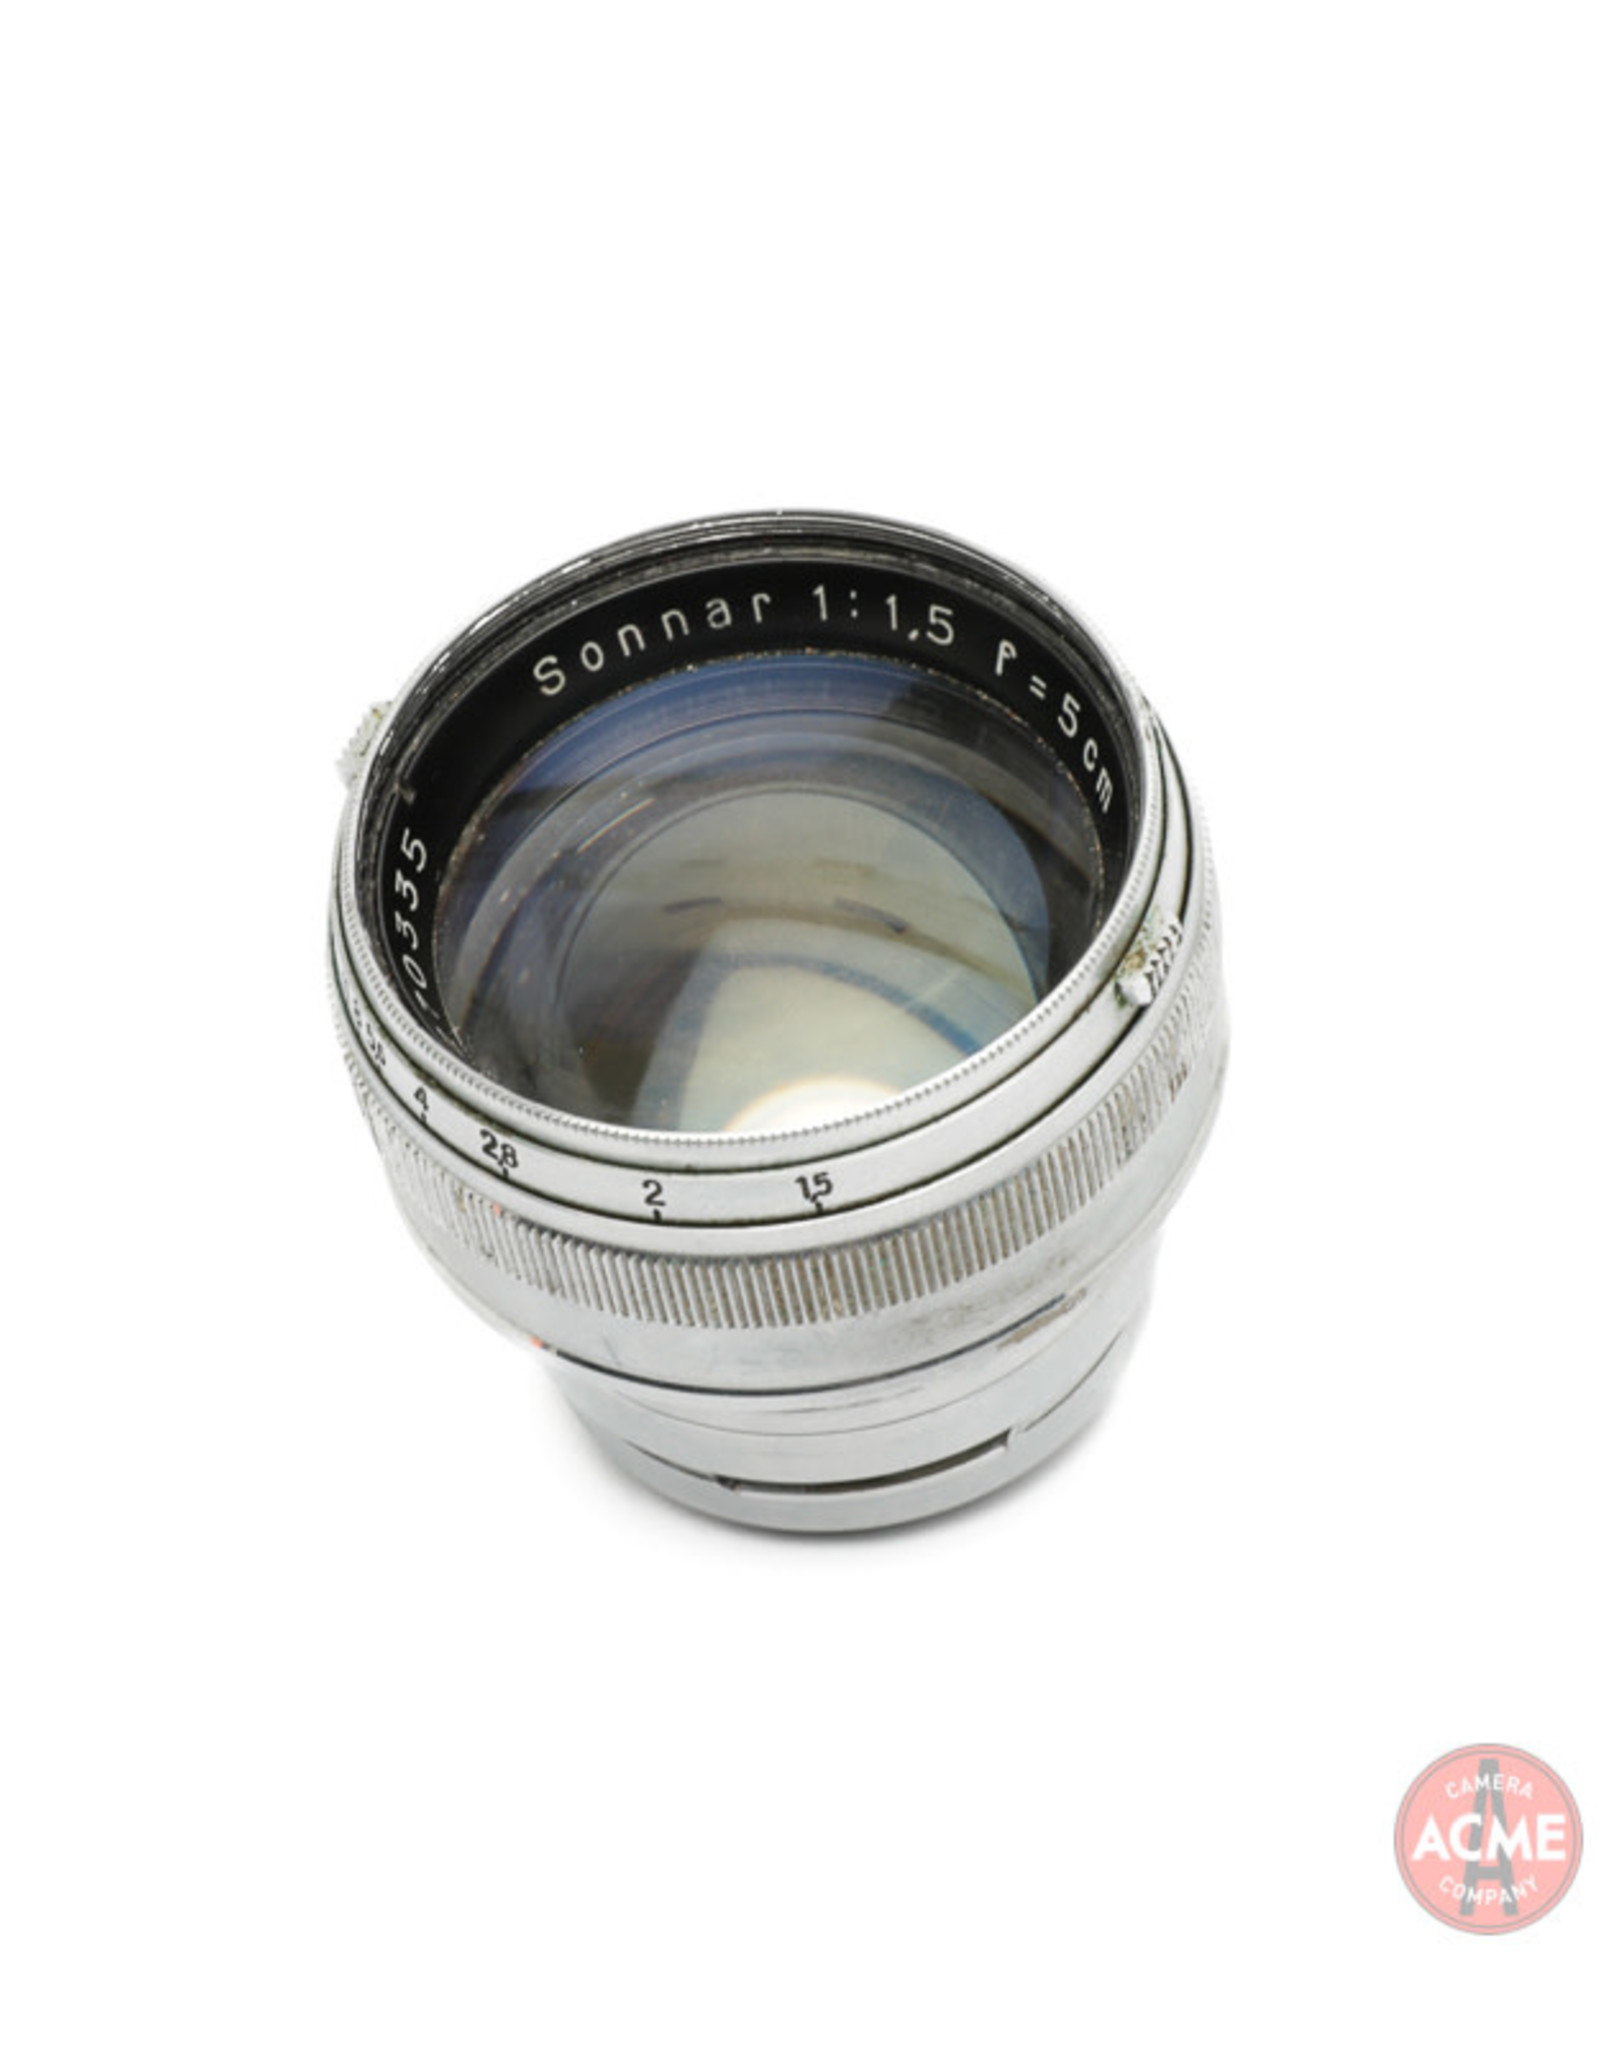 Carl Zeiss Sonnar 50mm F1.5 コンタックス用 想像を超えての - その他